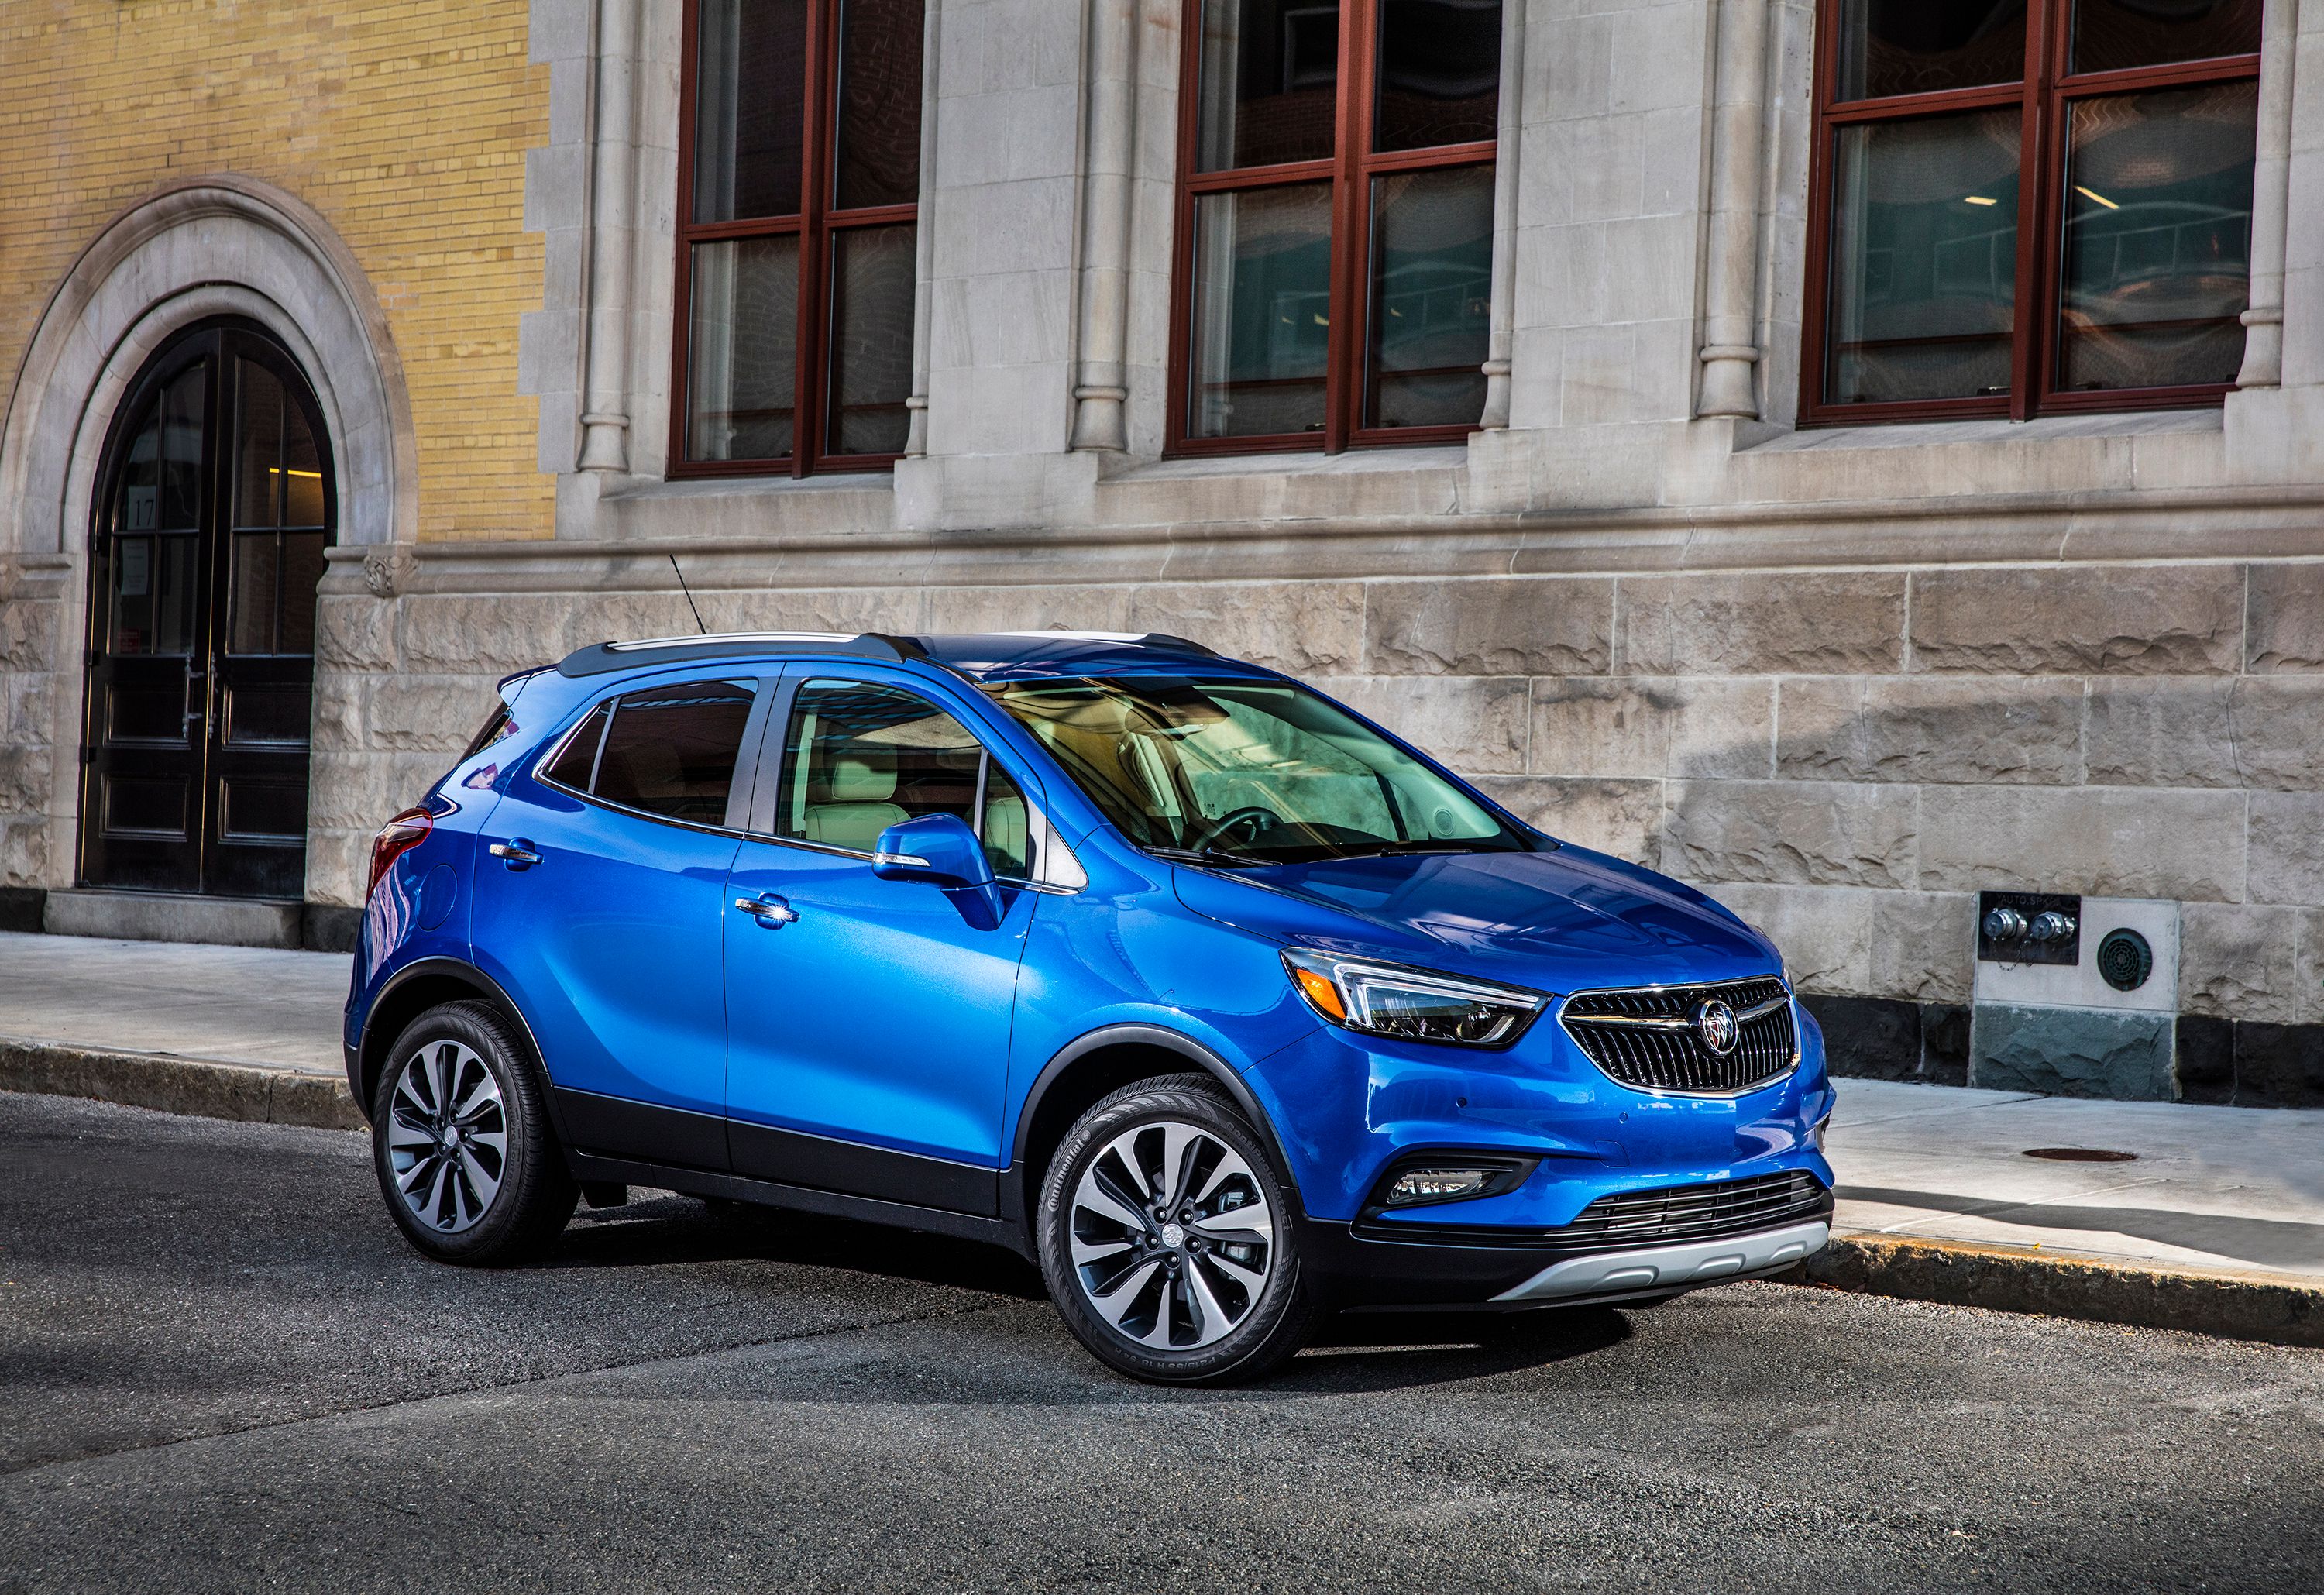 The 2017 Buick Encore parked on the street.